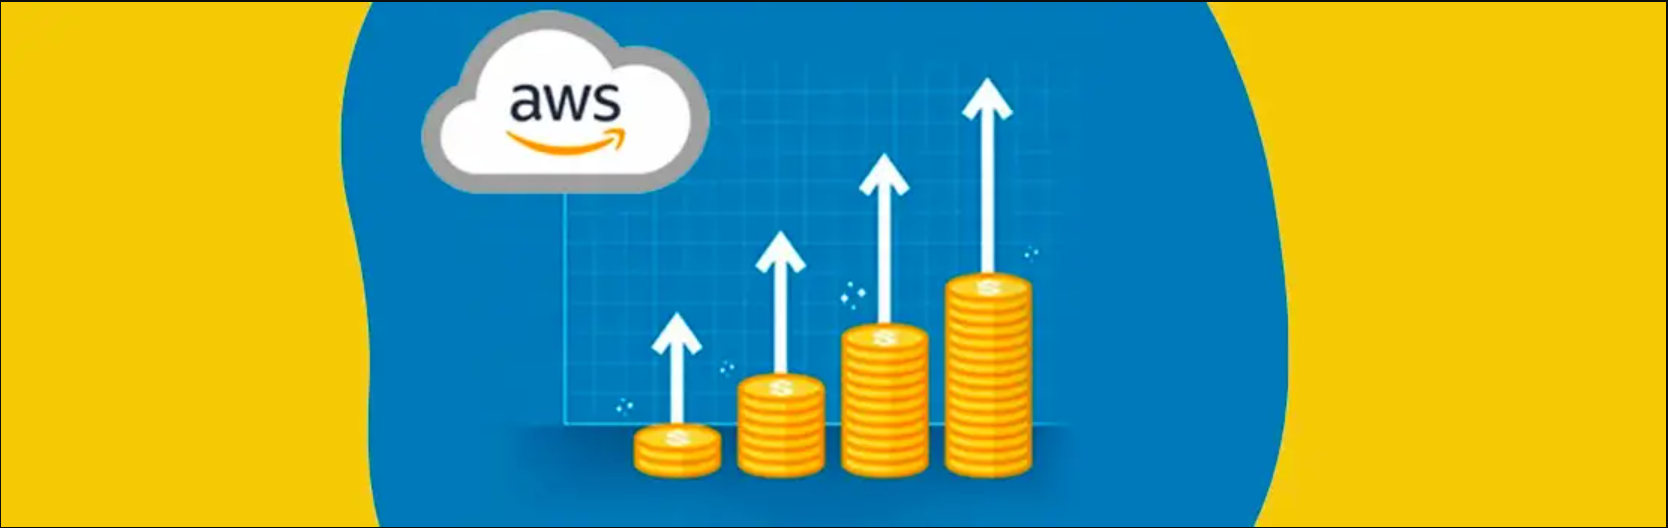 6 Keys for Cutting Costs and Boosting Performance on AWS